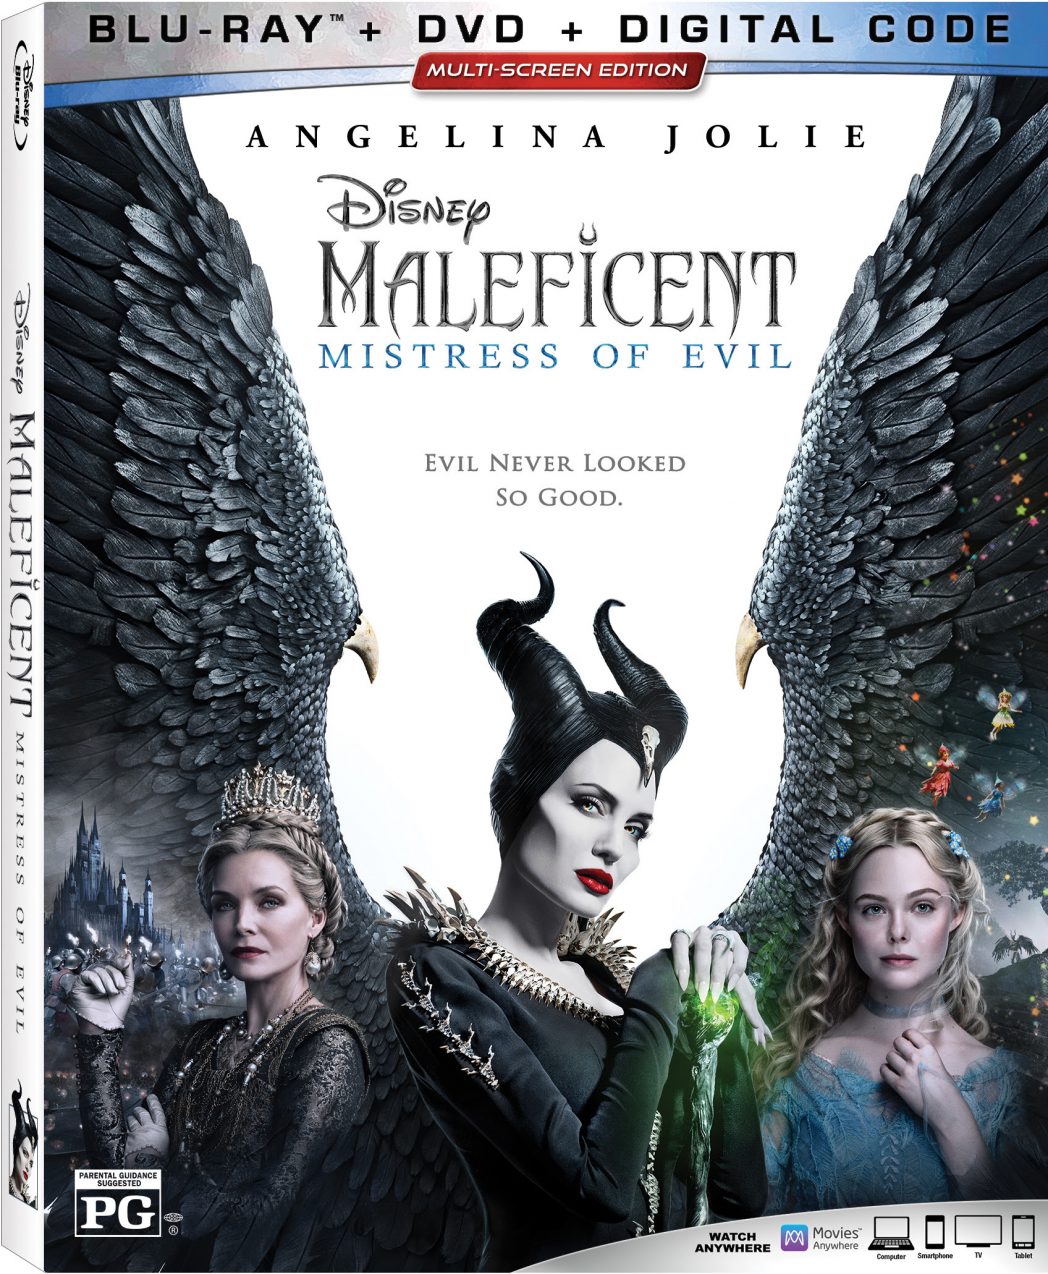 Maleficent: Mistress of Evil Now Available on DVD, Blu Ray, and more!